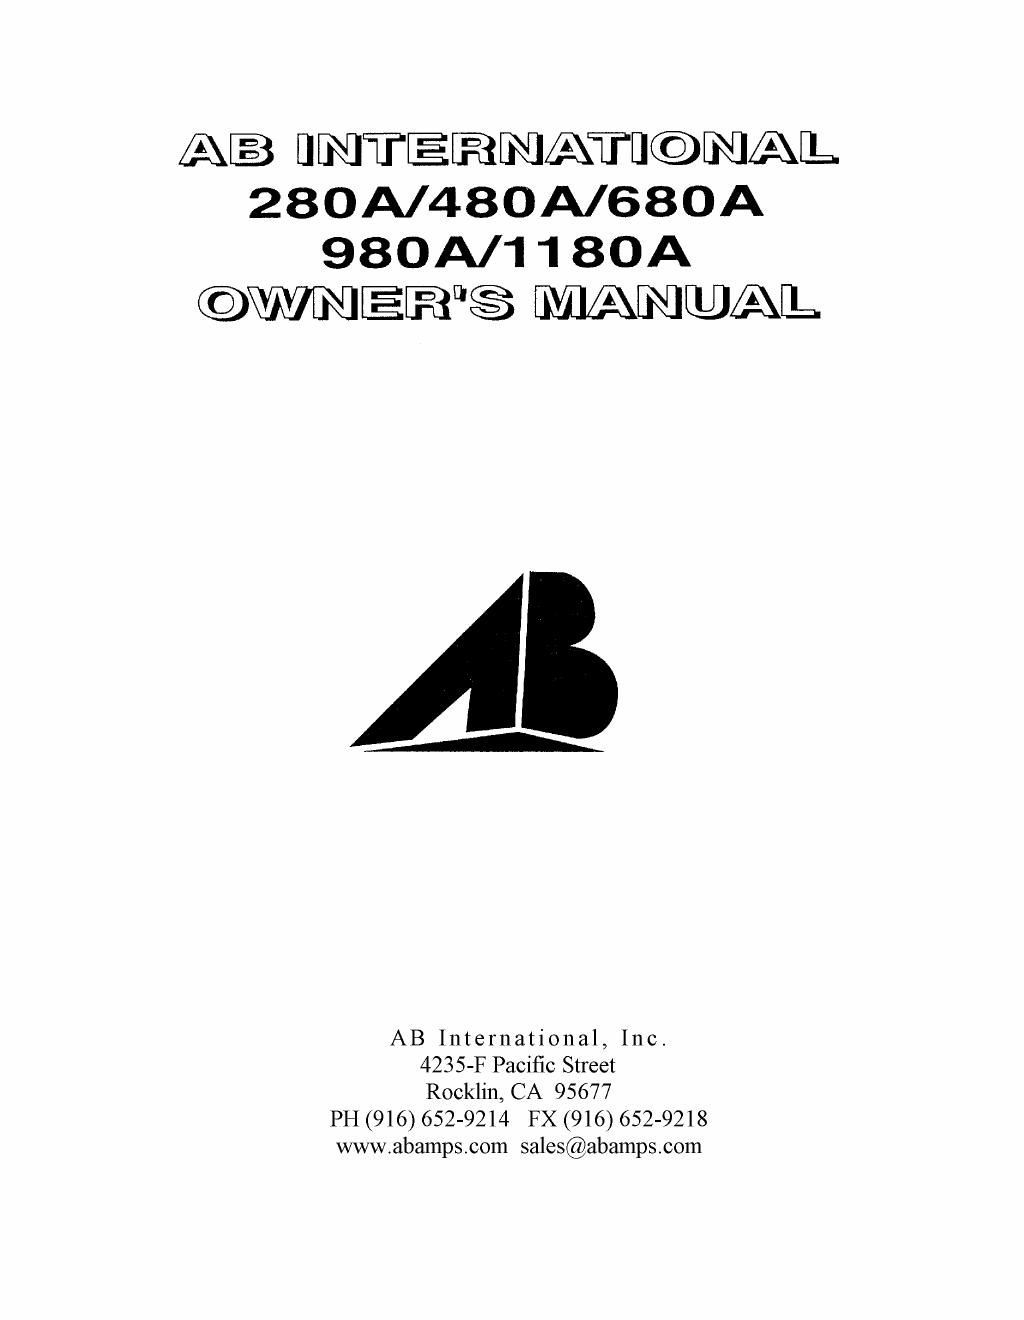 ab international 680 a owners manual